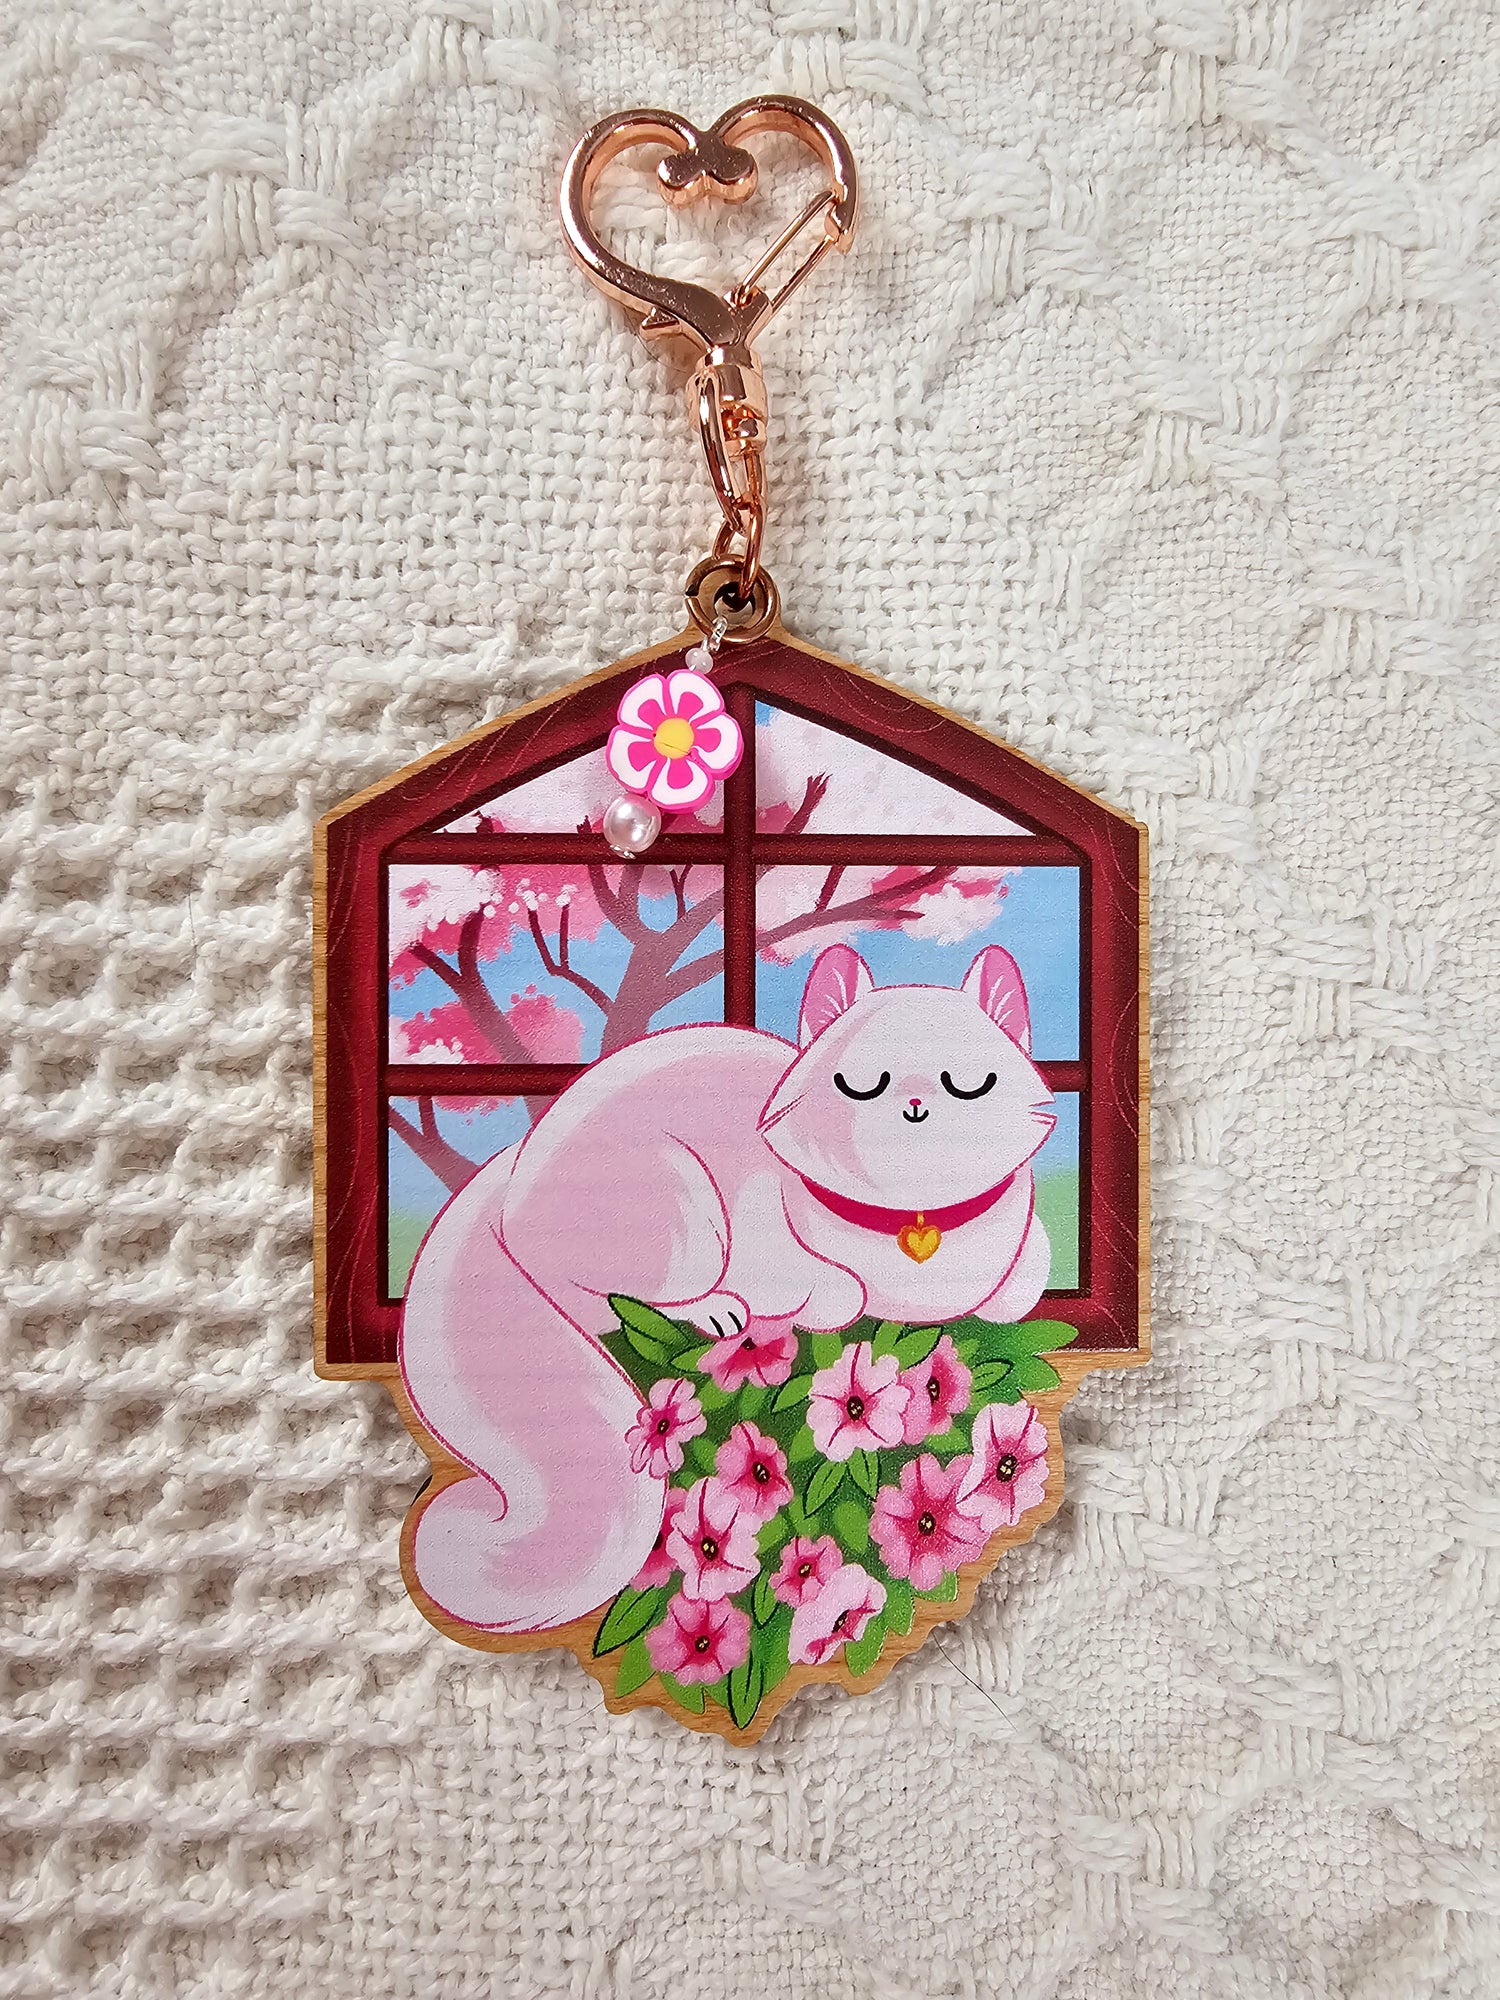 Window Seat - Wooden Kitty Keycharms with Accent Beads